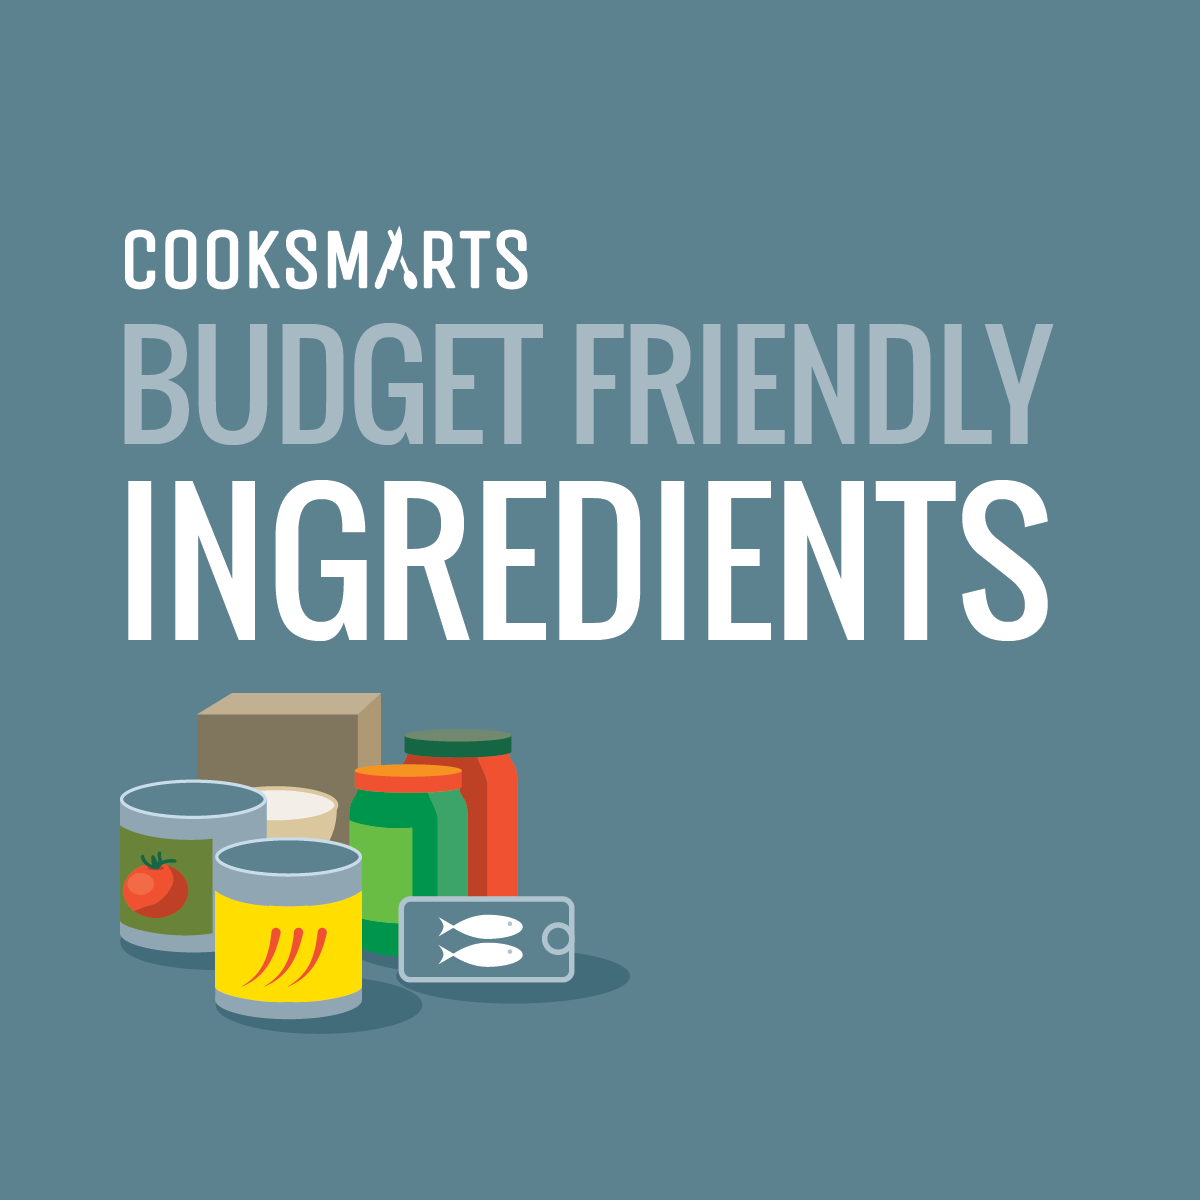 10 Budget-Friendly Ingredients for making healthy meals without breaking the bank via @CookSmarts